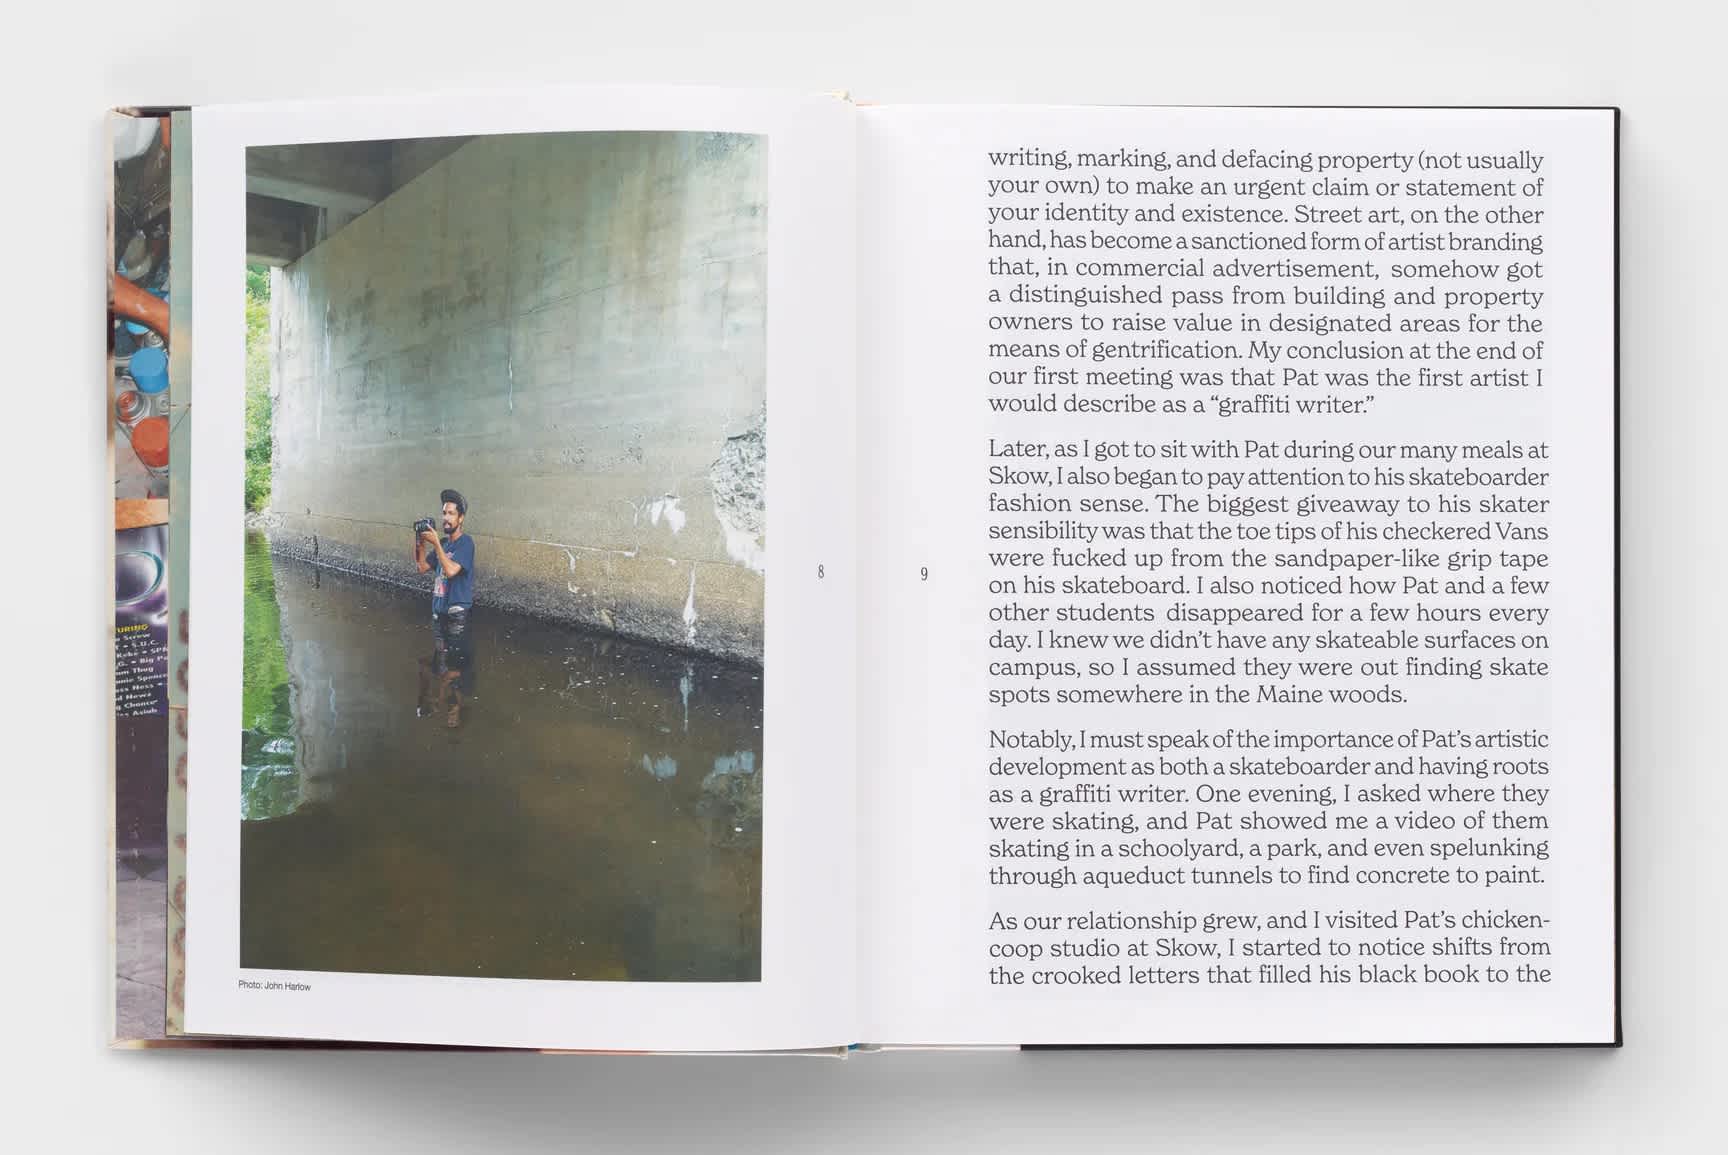 Open book with a photograph of a man standing in water under a bridge on the left page. The right page is filled with text.